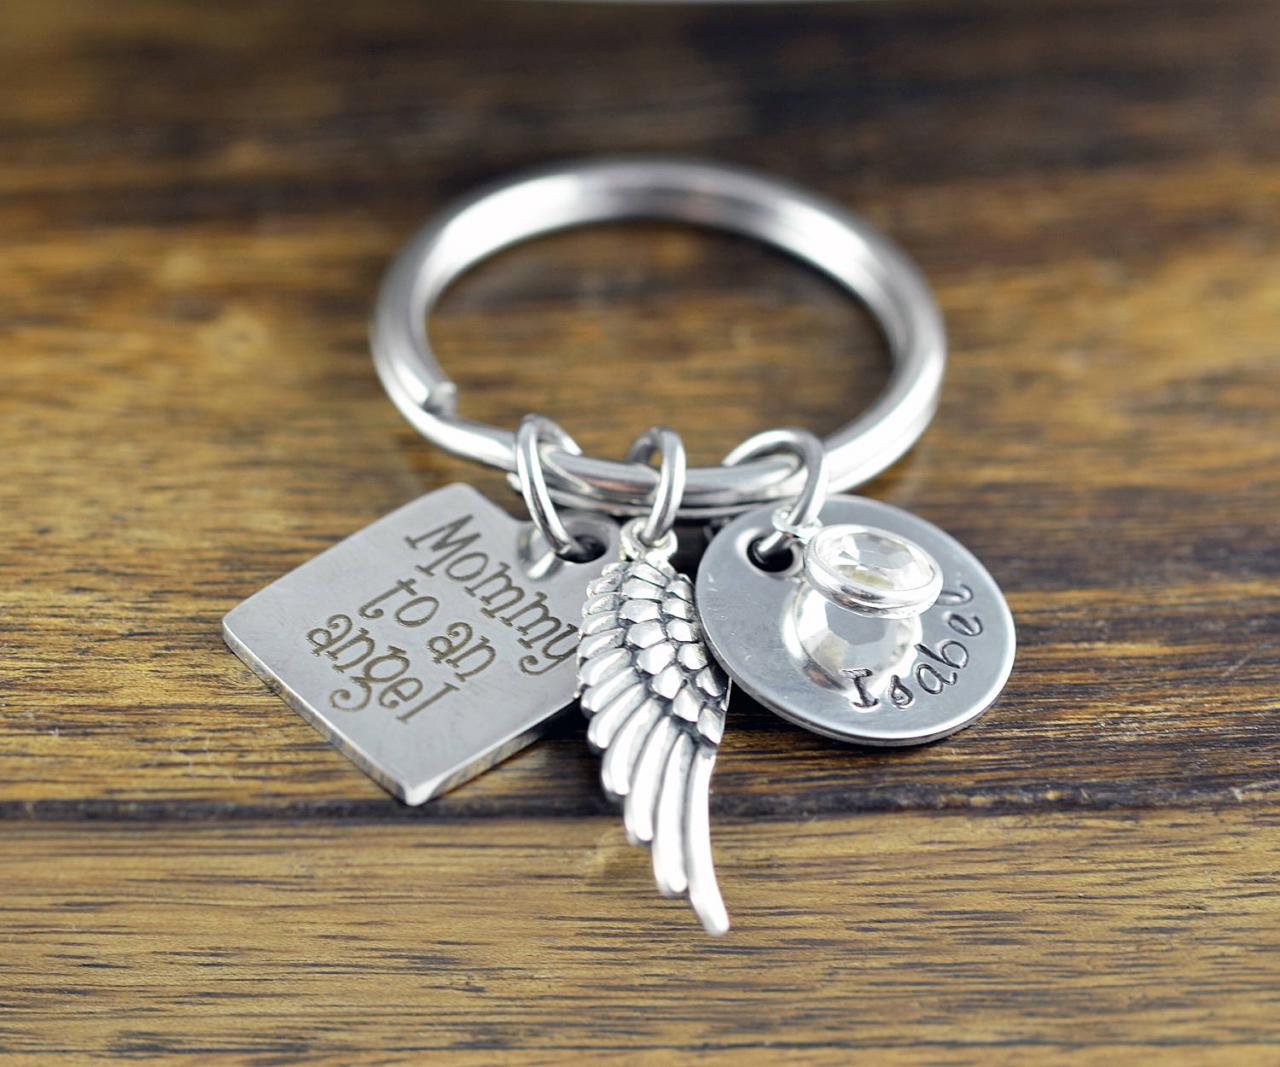 Mommy To An Angel KeyChain - Memorial Keychain, Remembrance Jewelry, Bereavement Gift, Sympathy Gift, Loss of Loved One, Infant Loss Gifts